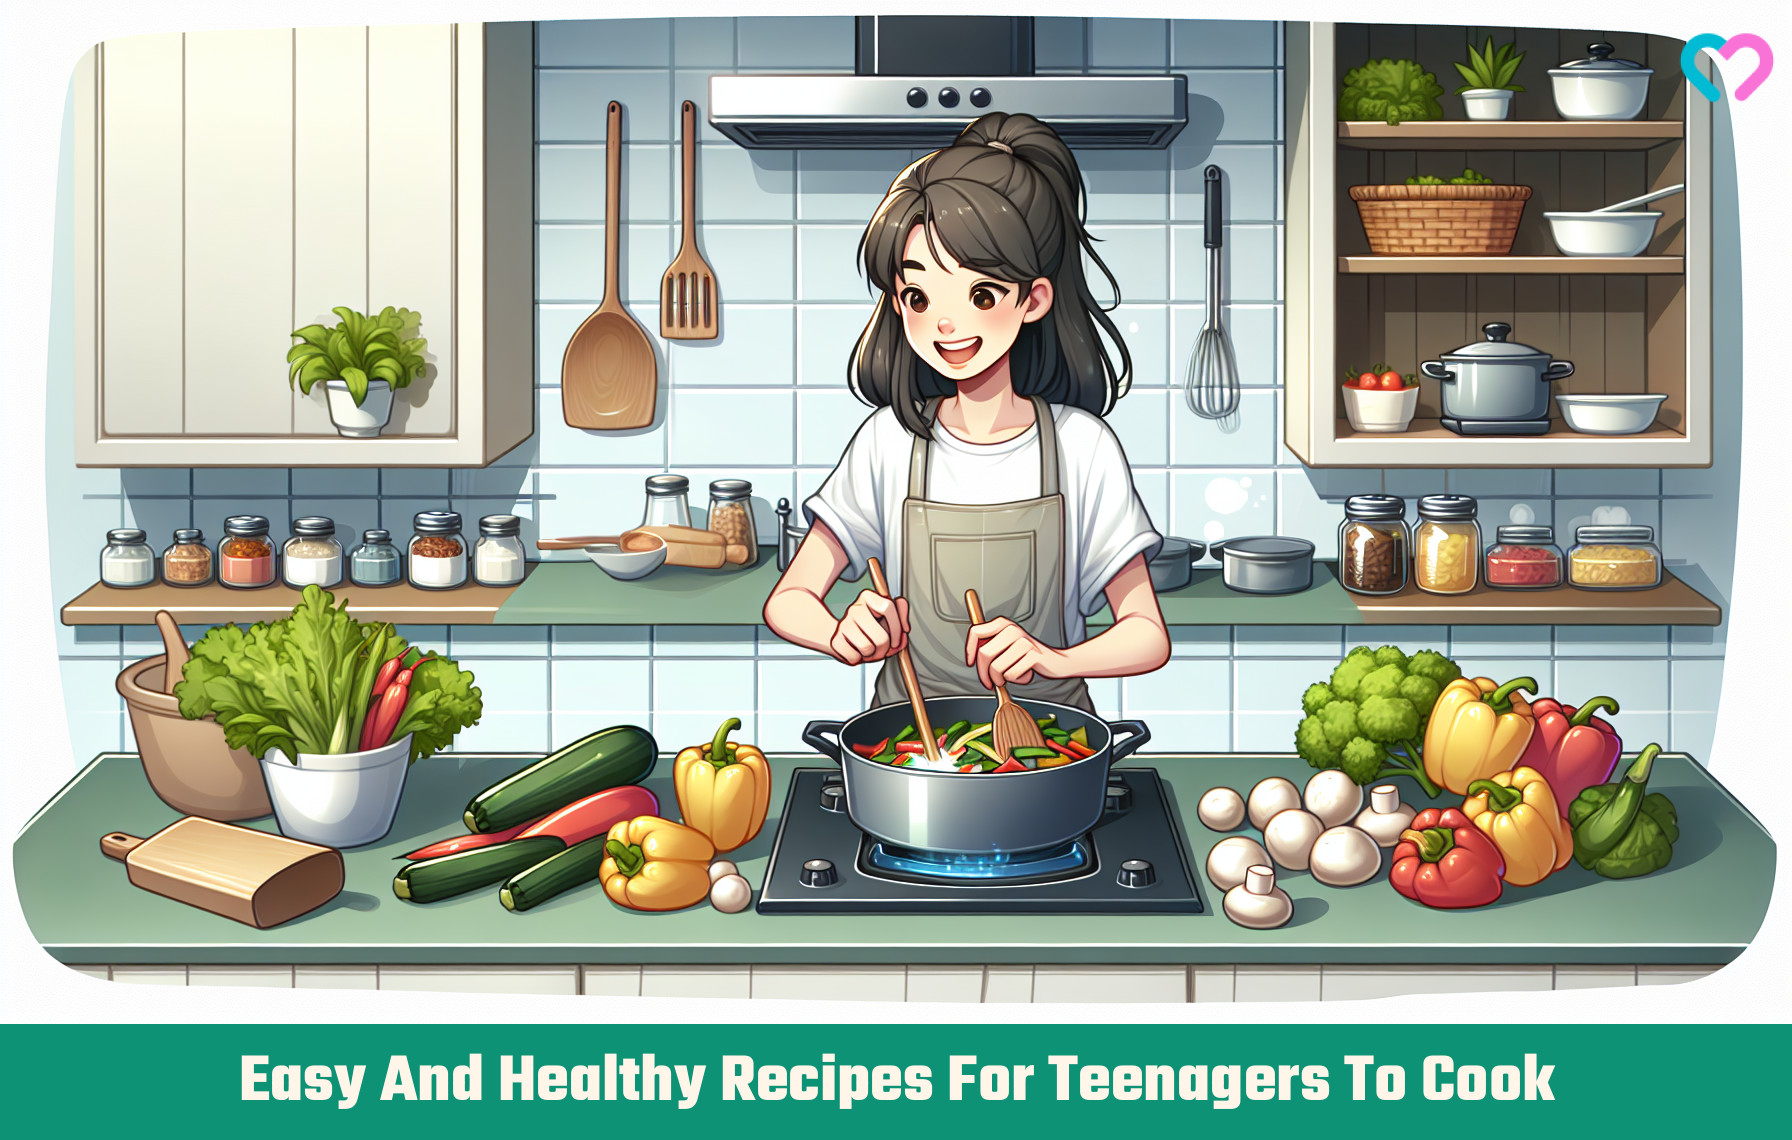 Recipes For Teenagers To Cook_illustration